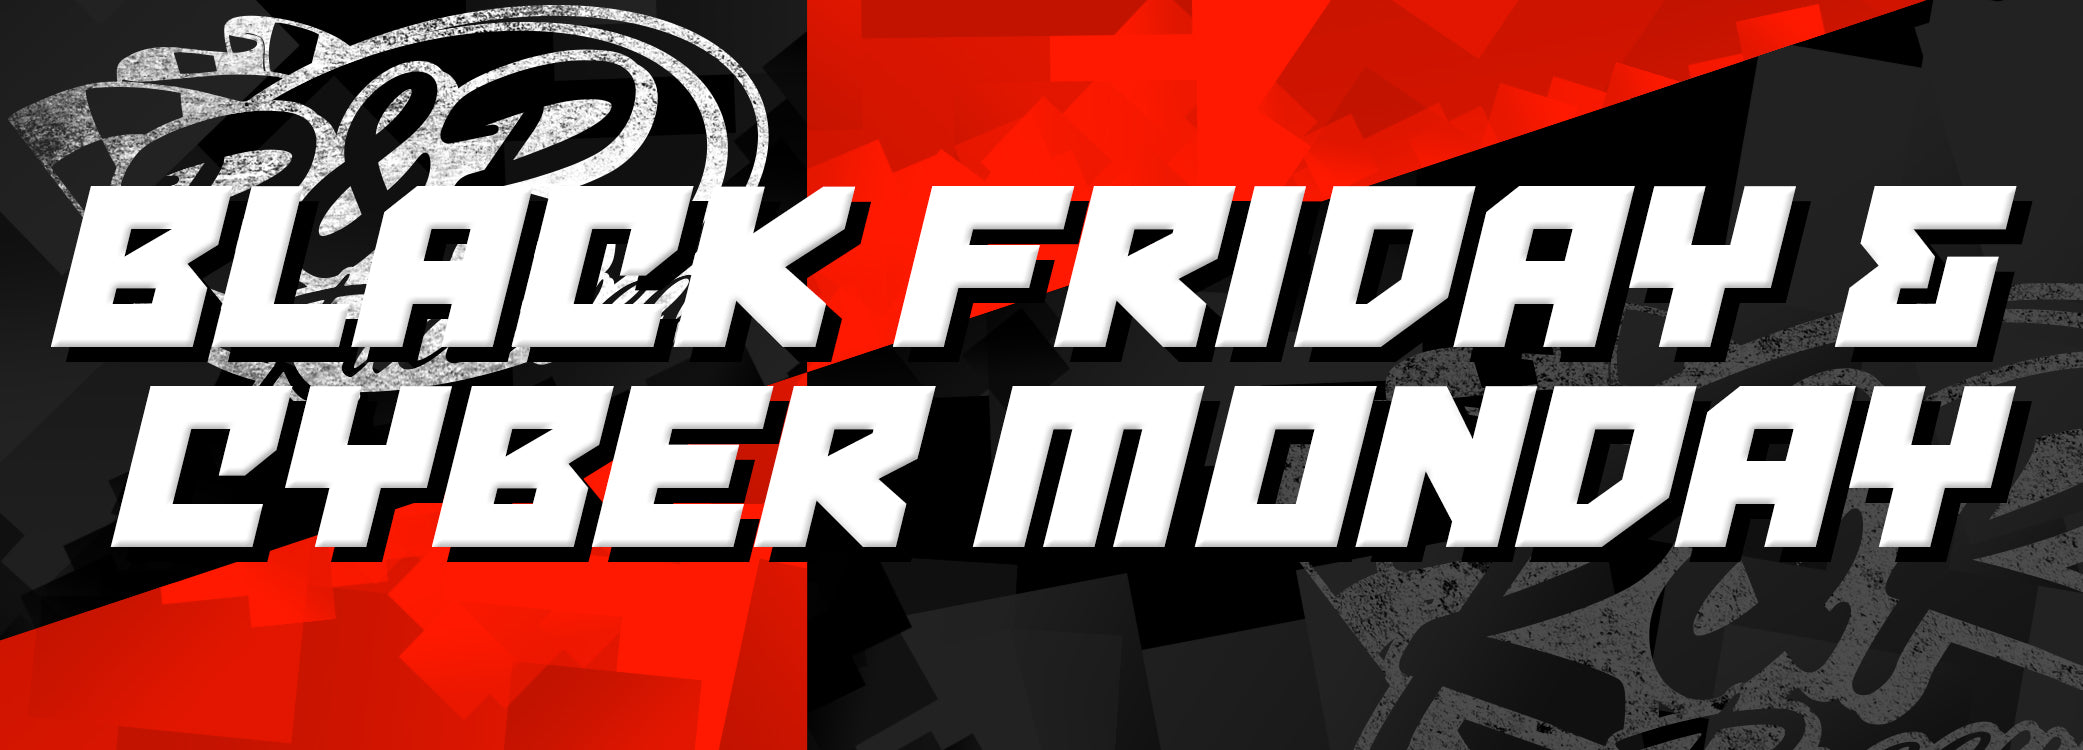 R&R Black Friday and Cyber Monday